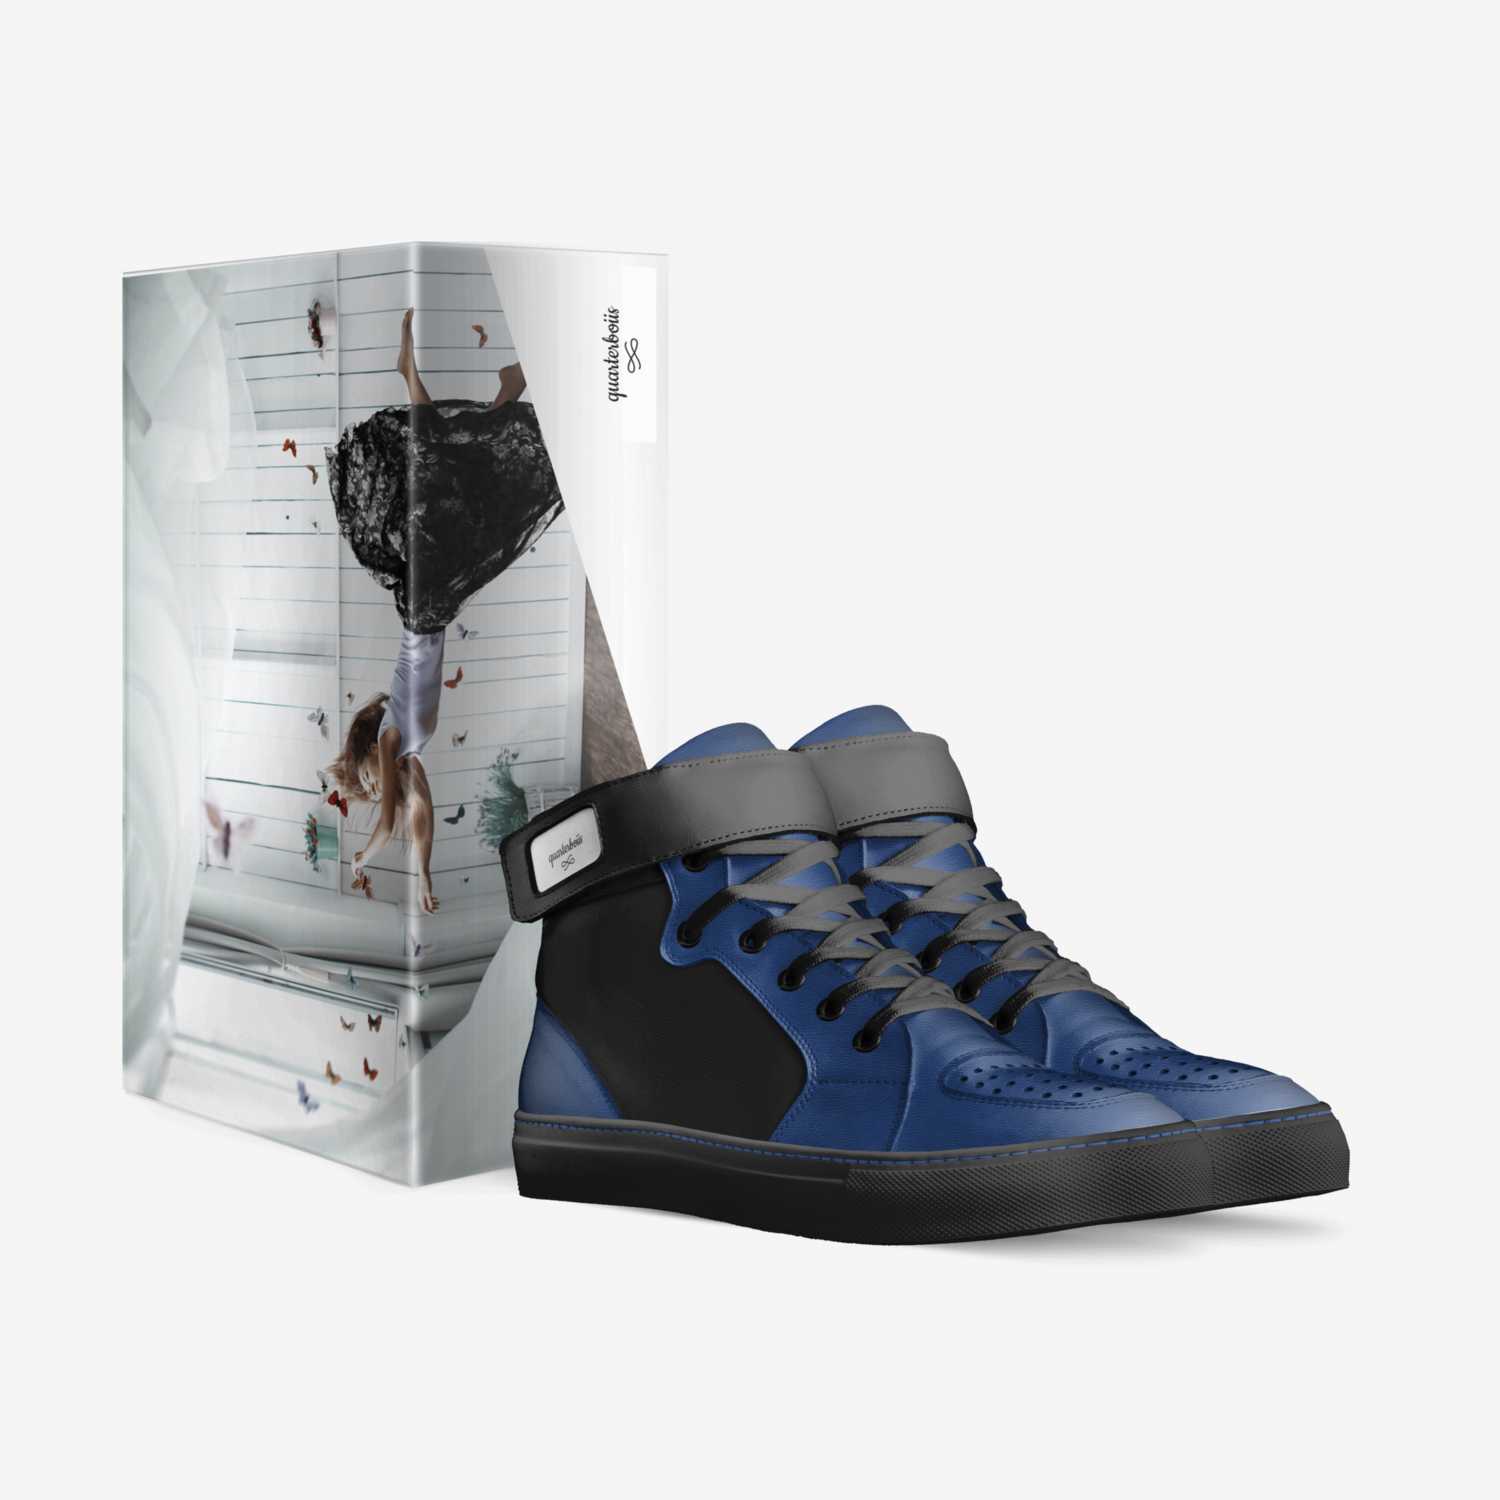 quarterboiis custom made in Italy shoes by Roosevelt London | Box view